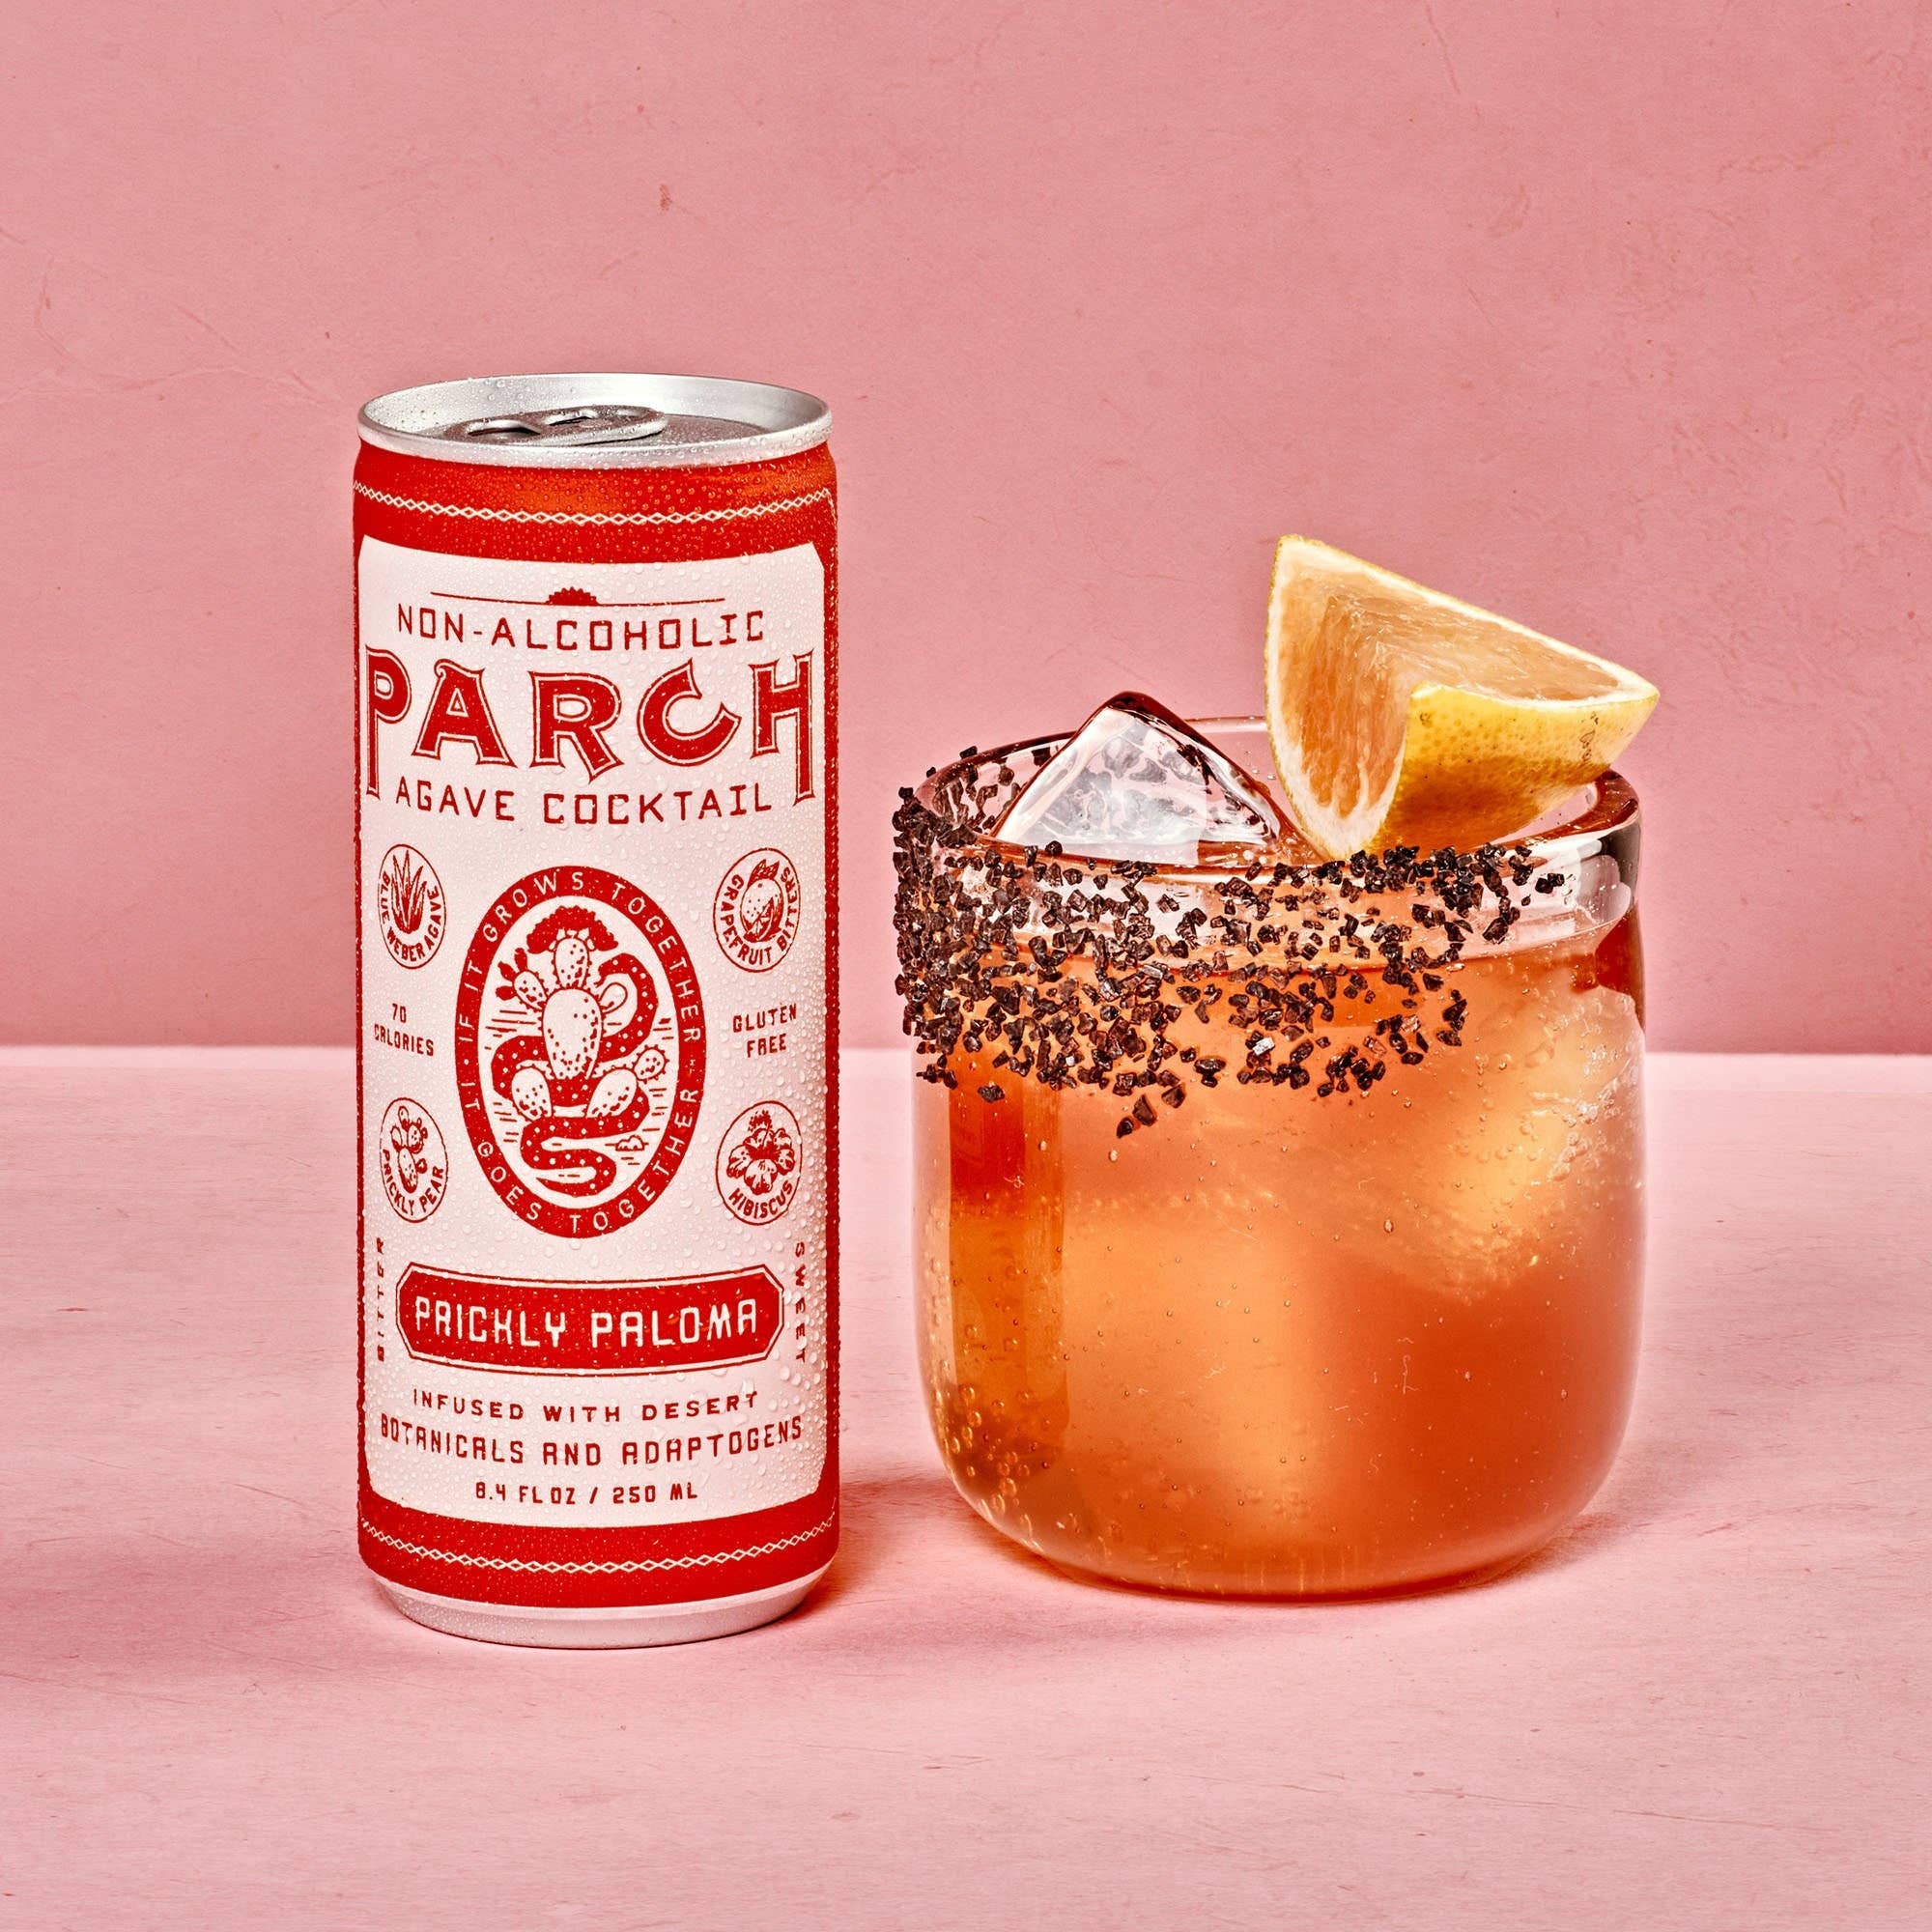 PARCH Prickly Paloma or Spice Pinarita - Non-Alcoholic Agave Cocktails